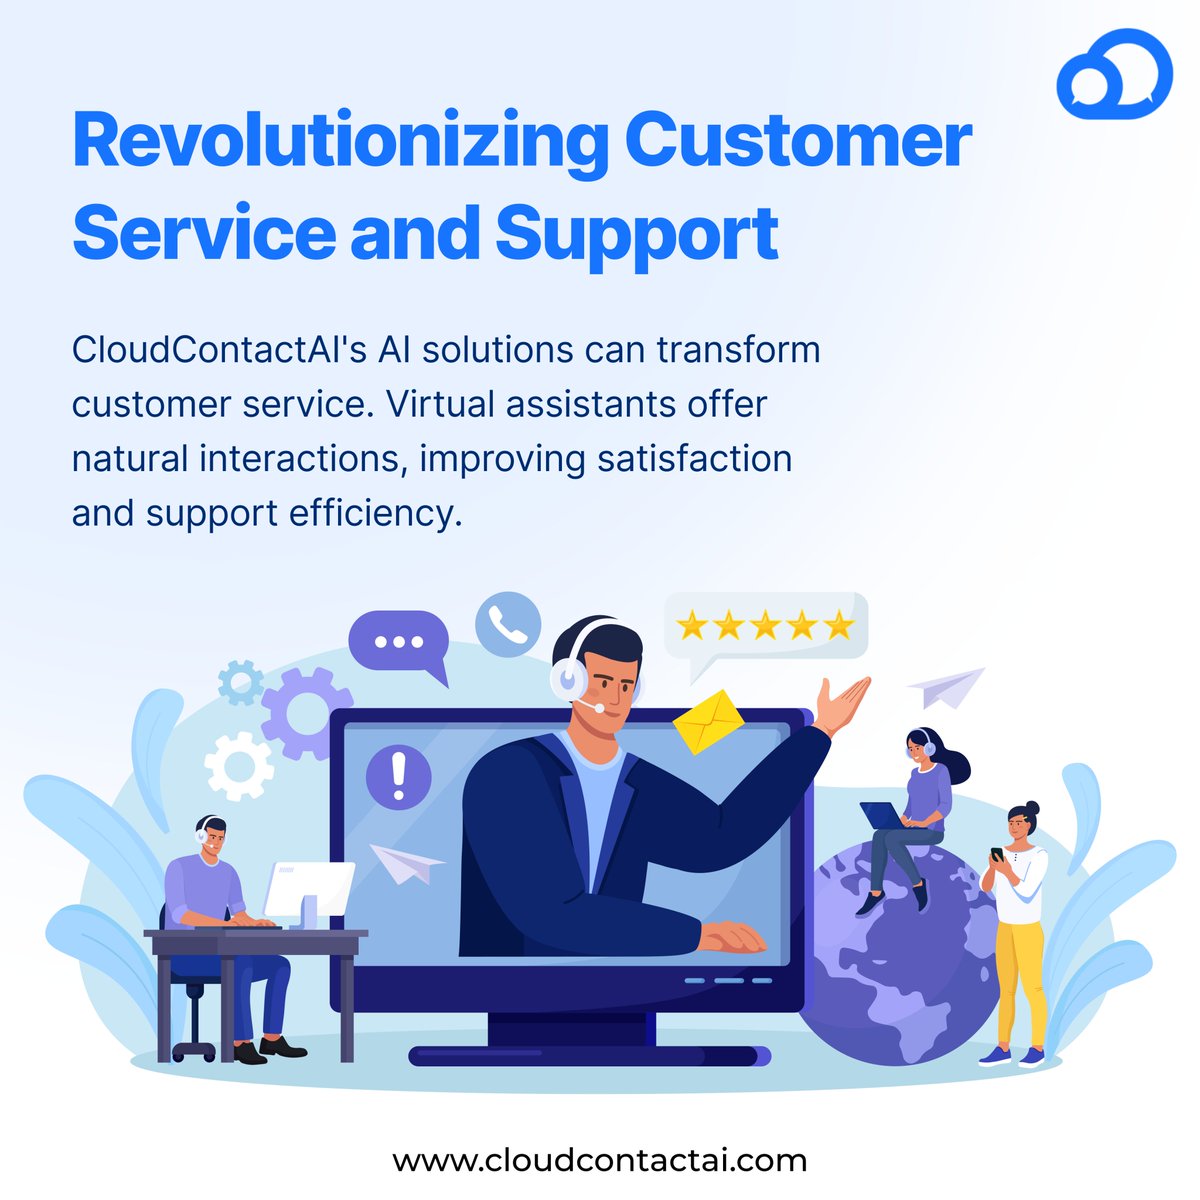 Explore our revolutionary customer #Service. From #AI-powered #Chatbots to personalized interactions, we're redefining customer #Experiences!

Read more👉bit.ly/426khII

#GenAI #VirtualAssistants #Customer #Support #Solutions #Revolution #Engagement #CloudContactAI